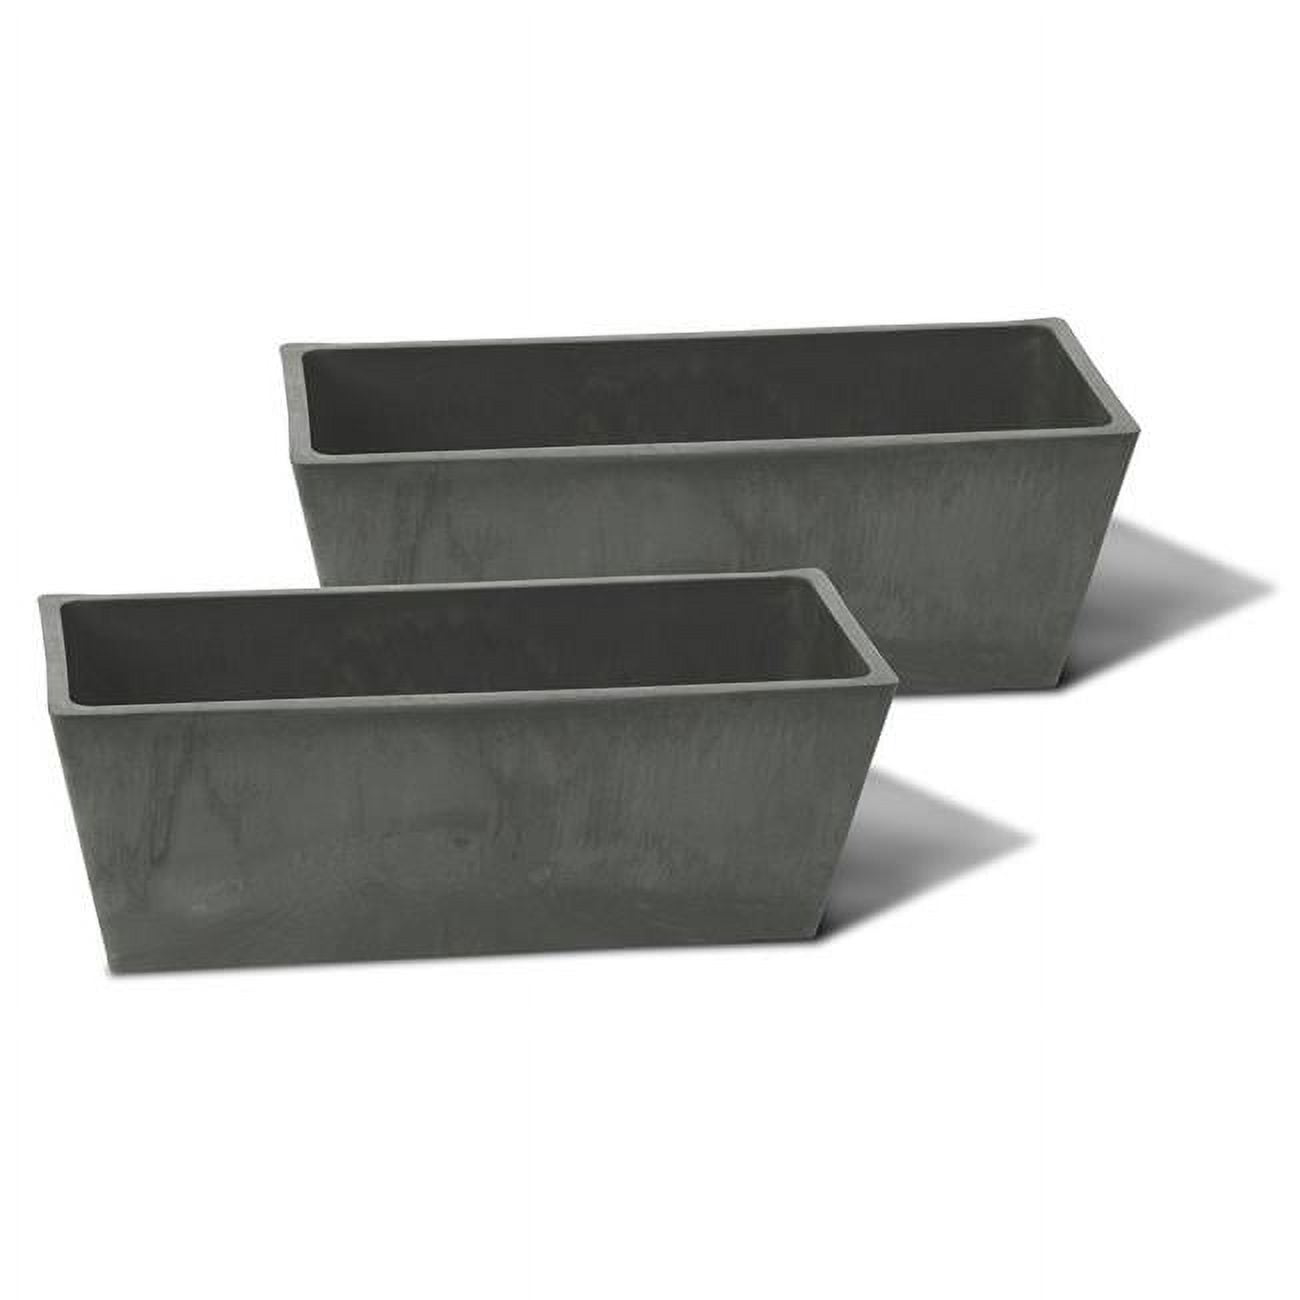 19636 5.5 X 6 X 14 In. Valencia Rectangle Windowsill Planter, Light Charcoal - Pack Of 2